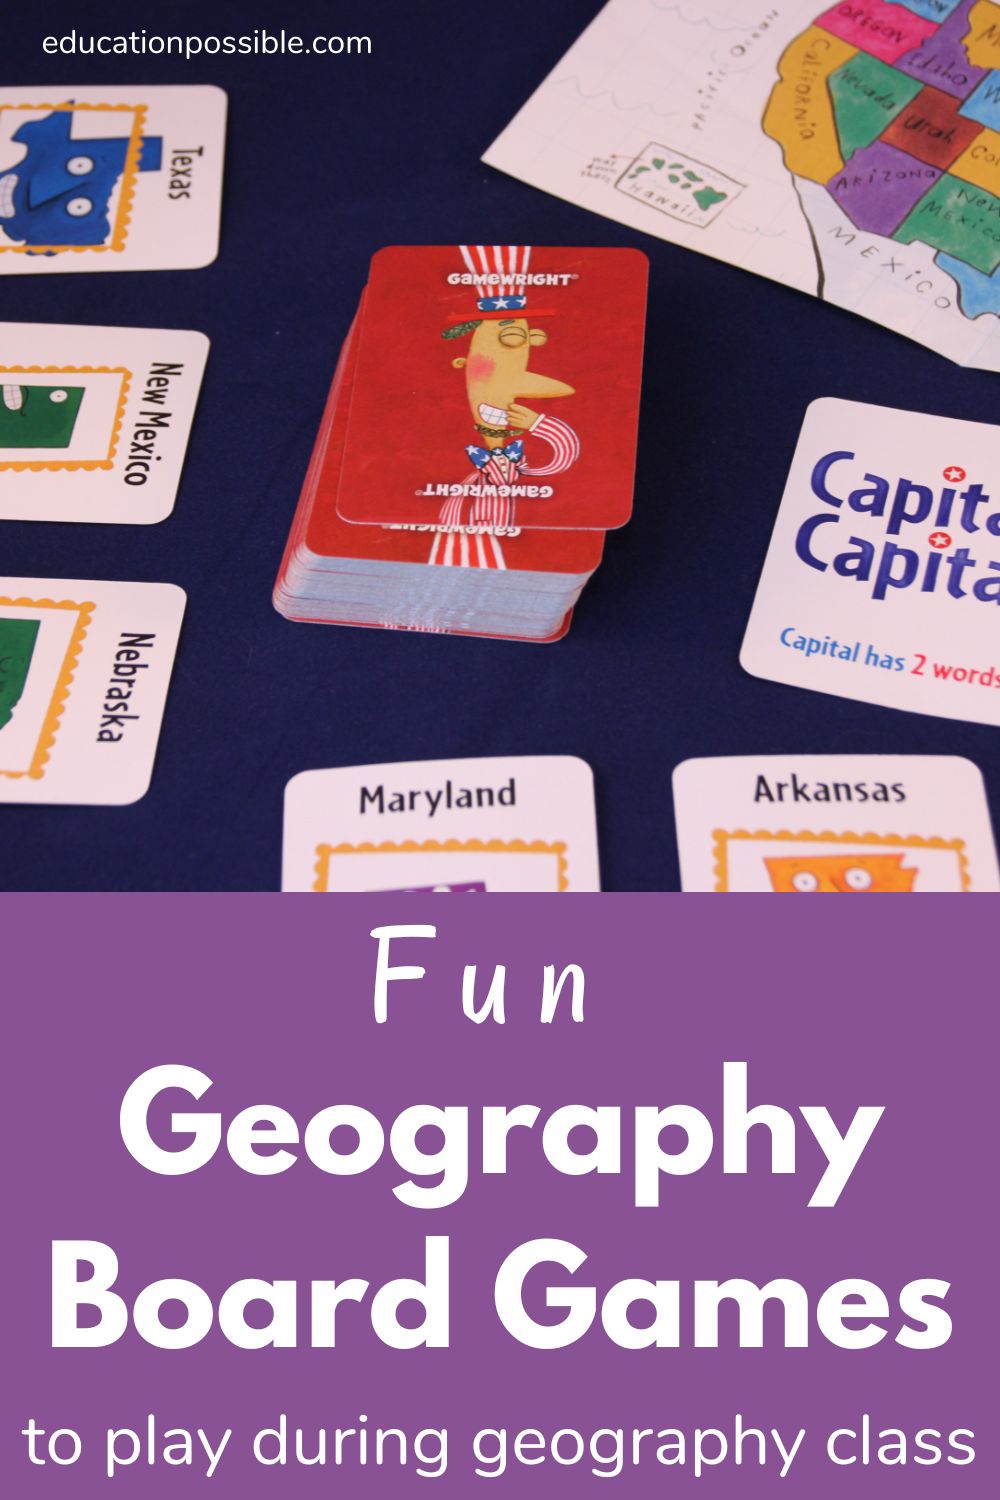 The Scrambled States of America geography game being played. Cards lying on a blue background.